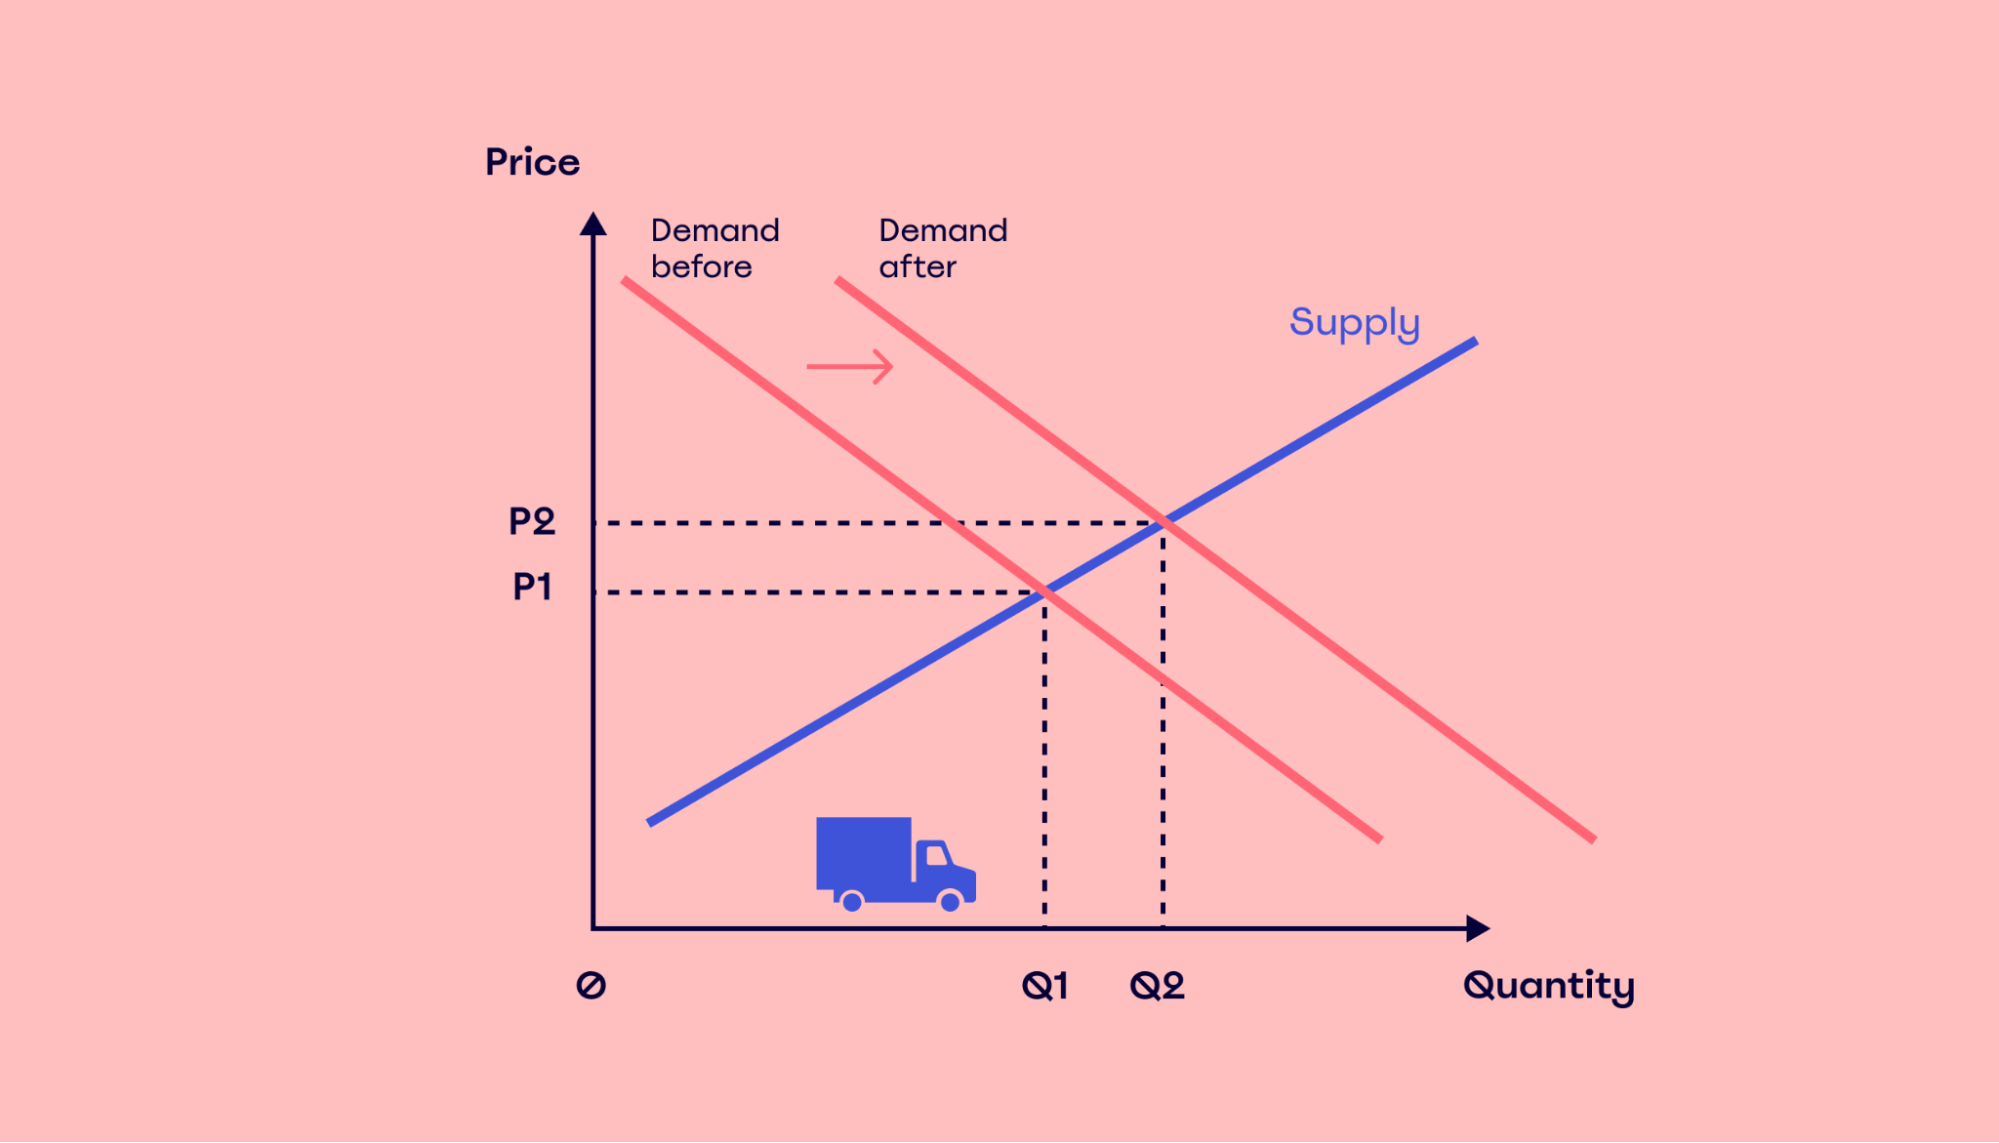 price increases when demand increases and supply is constant